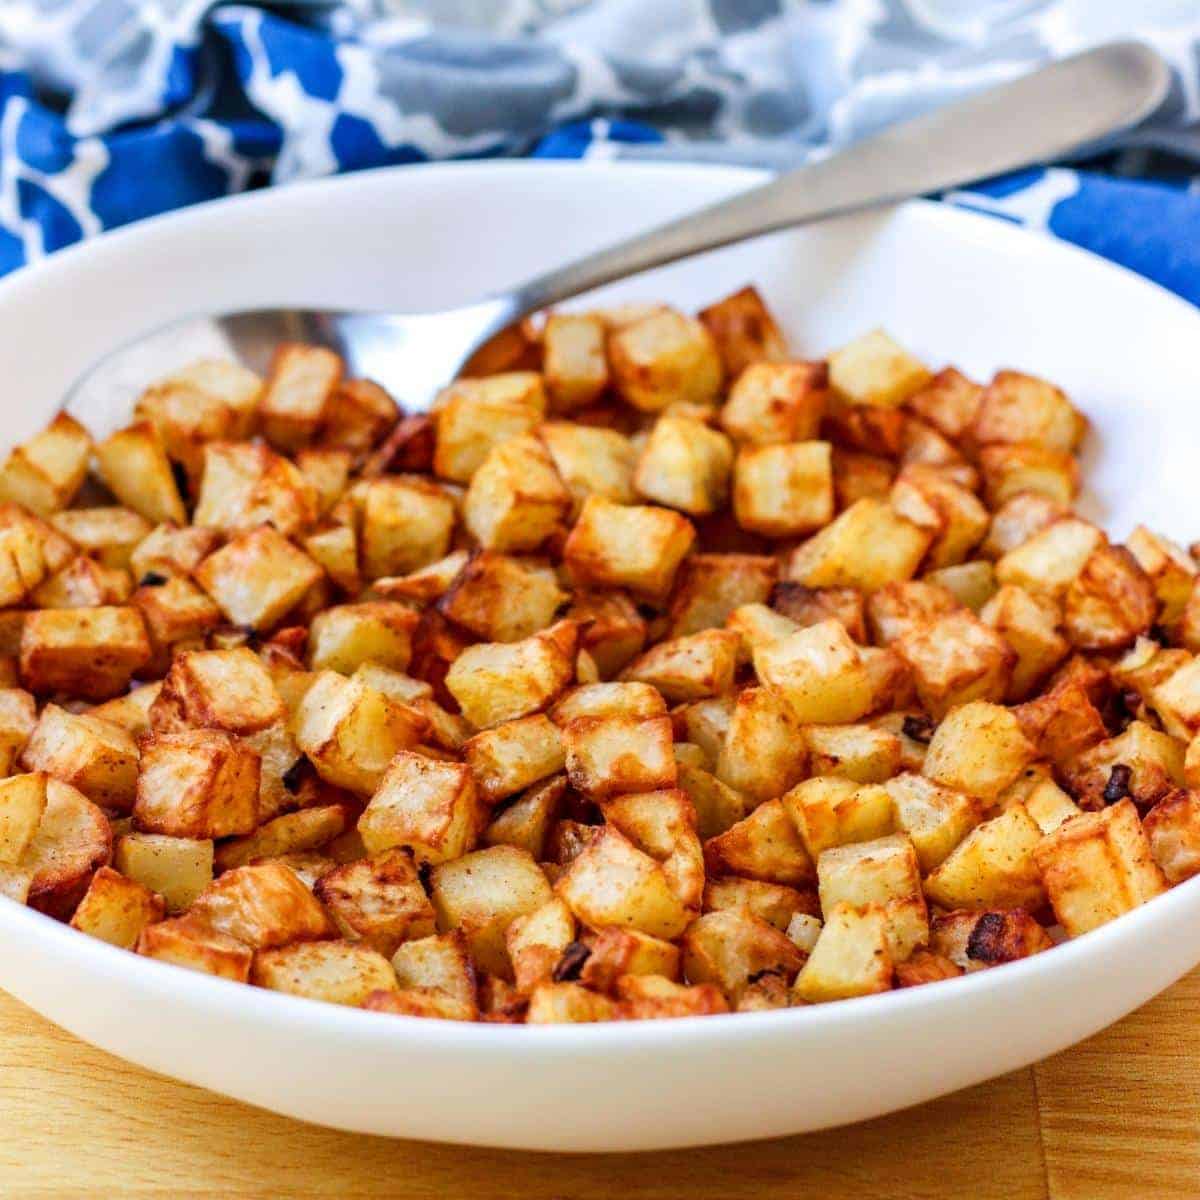 A close-up view of air-fried home fries in a white bowl and has a blue and white napkin in the background.